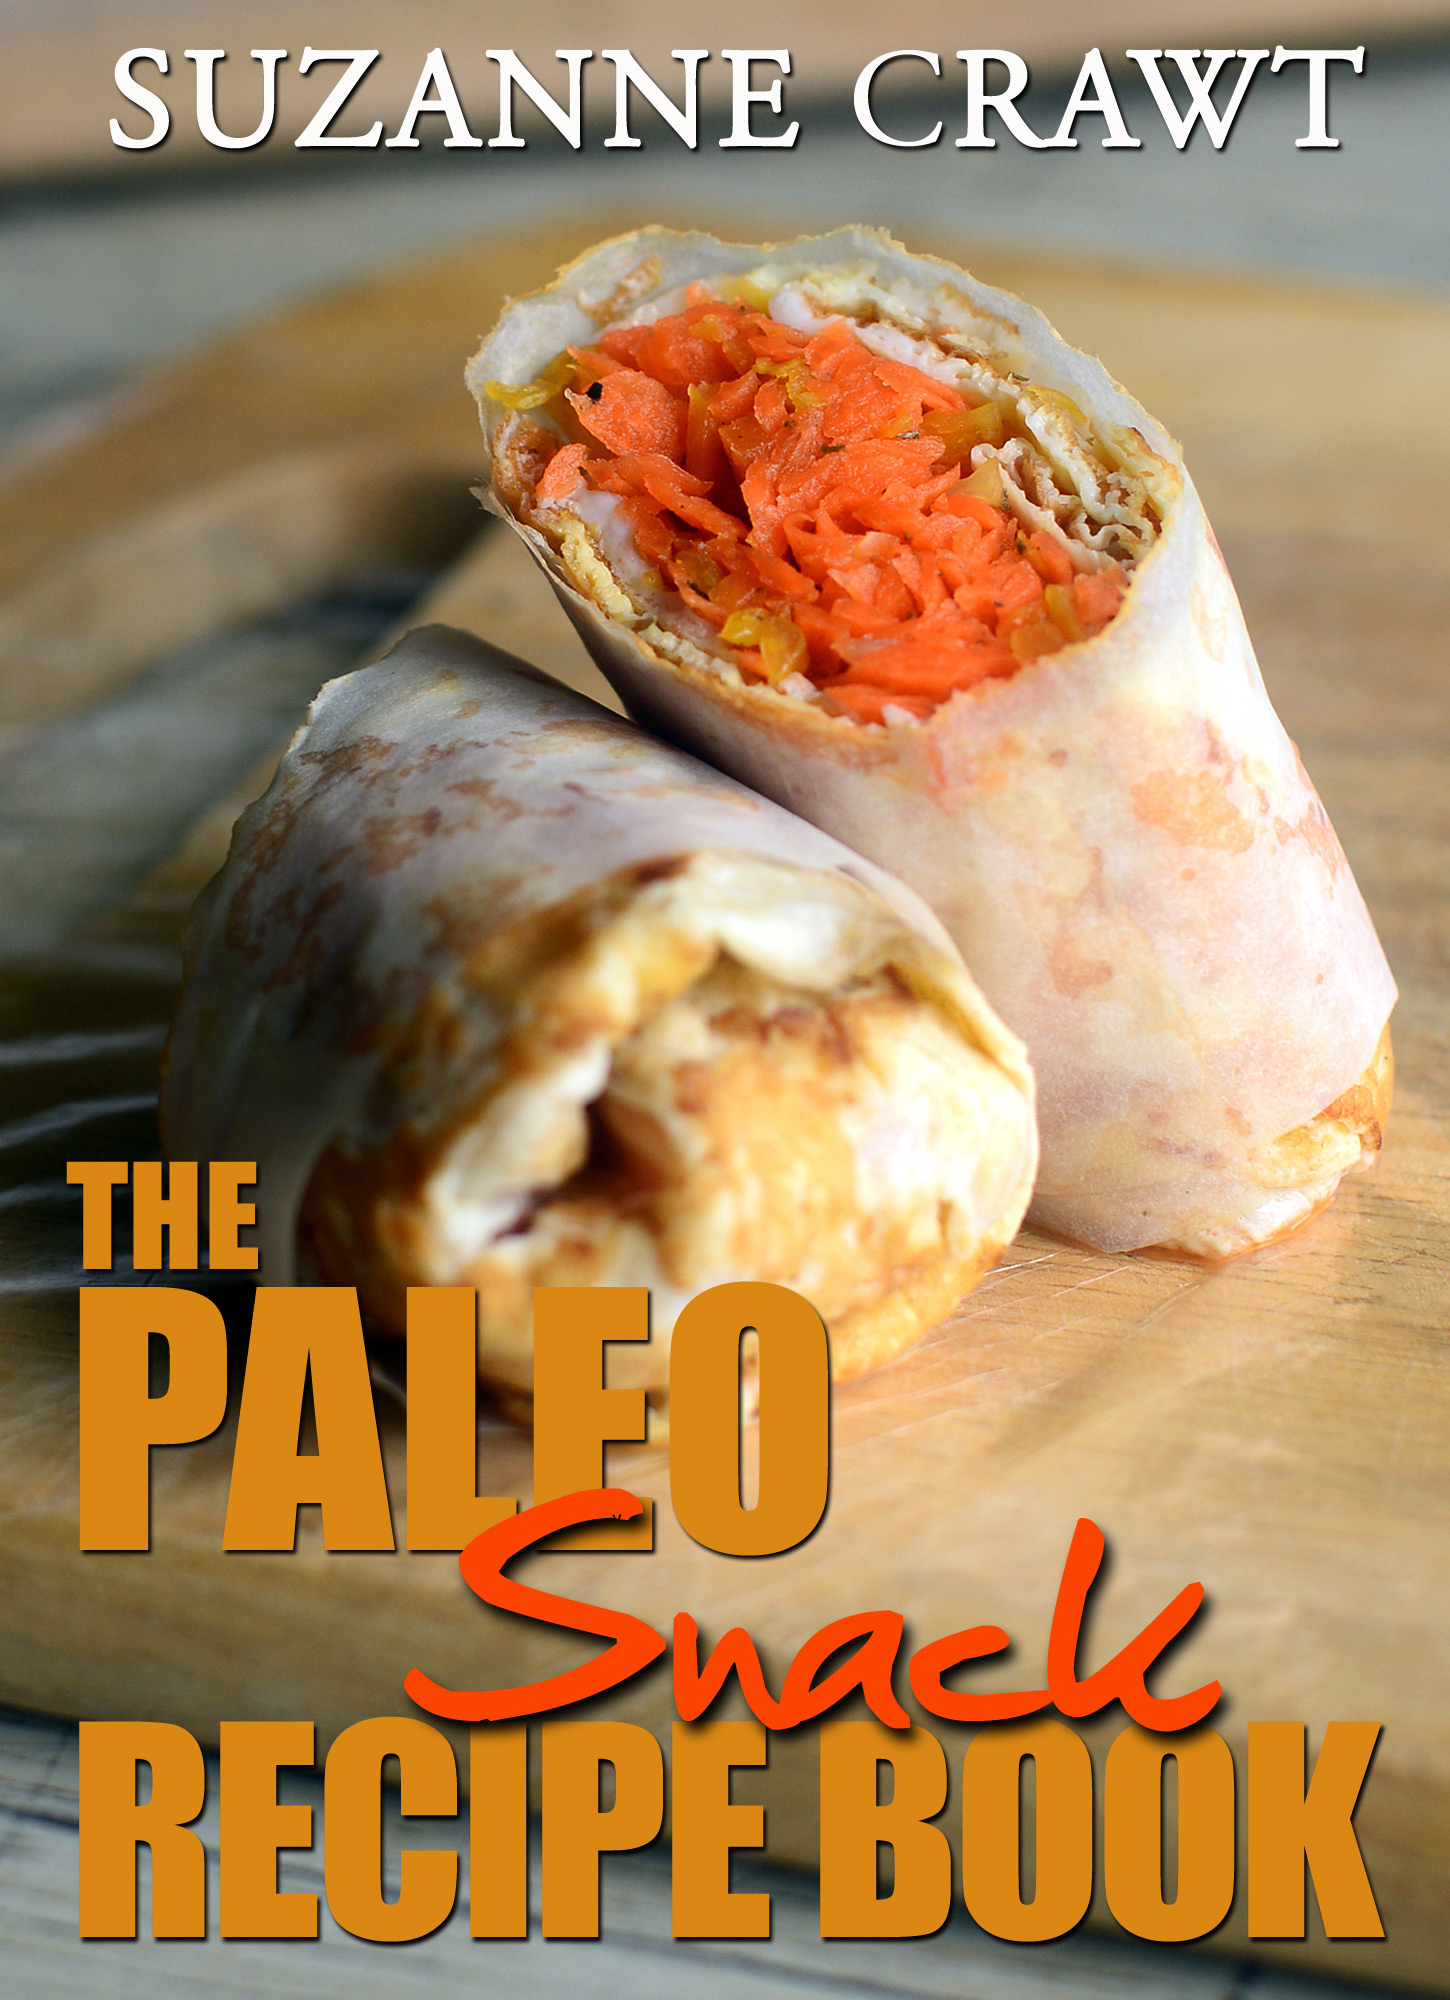 The Paleo Diet Snack Ideas Recipe Book Download - The ...